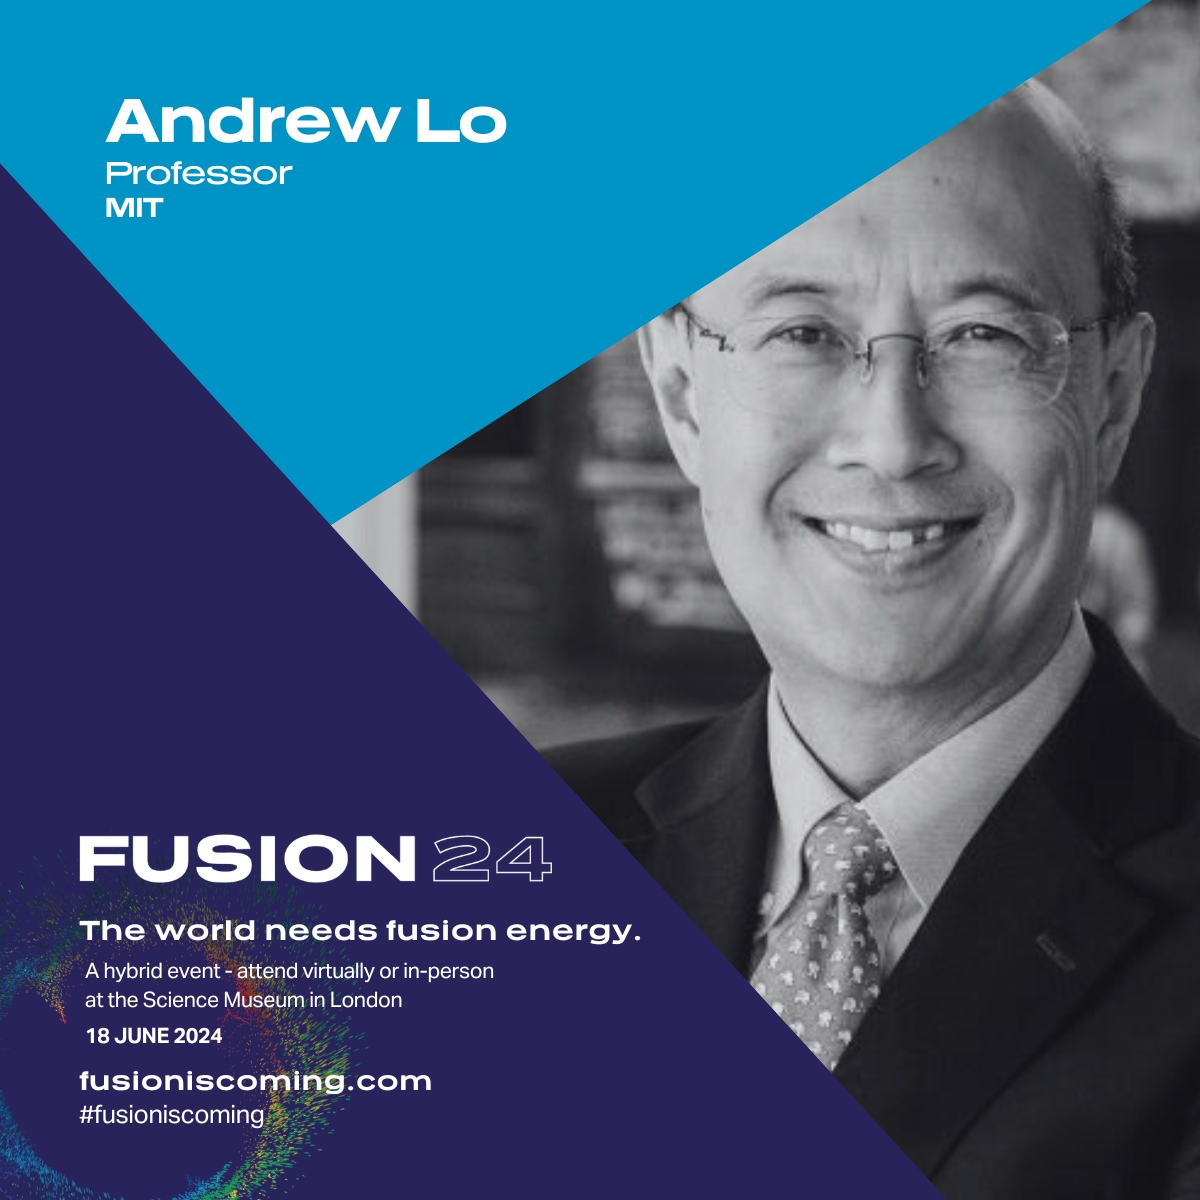 On our 'THINKING BIG: How do we fund fusion?' panel➡Andrew Lo from @MIT Andrew is the Charles E. and Susan T. Harris Professor at @MITSloan, and has been named one of Time Magazine’s 100 most influential people in the world. ➡ fusioniscoming.com/the-schedule #FusionIsComing #FUSION24